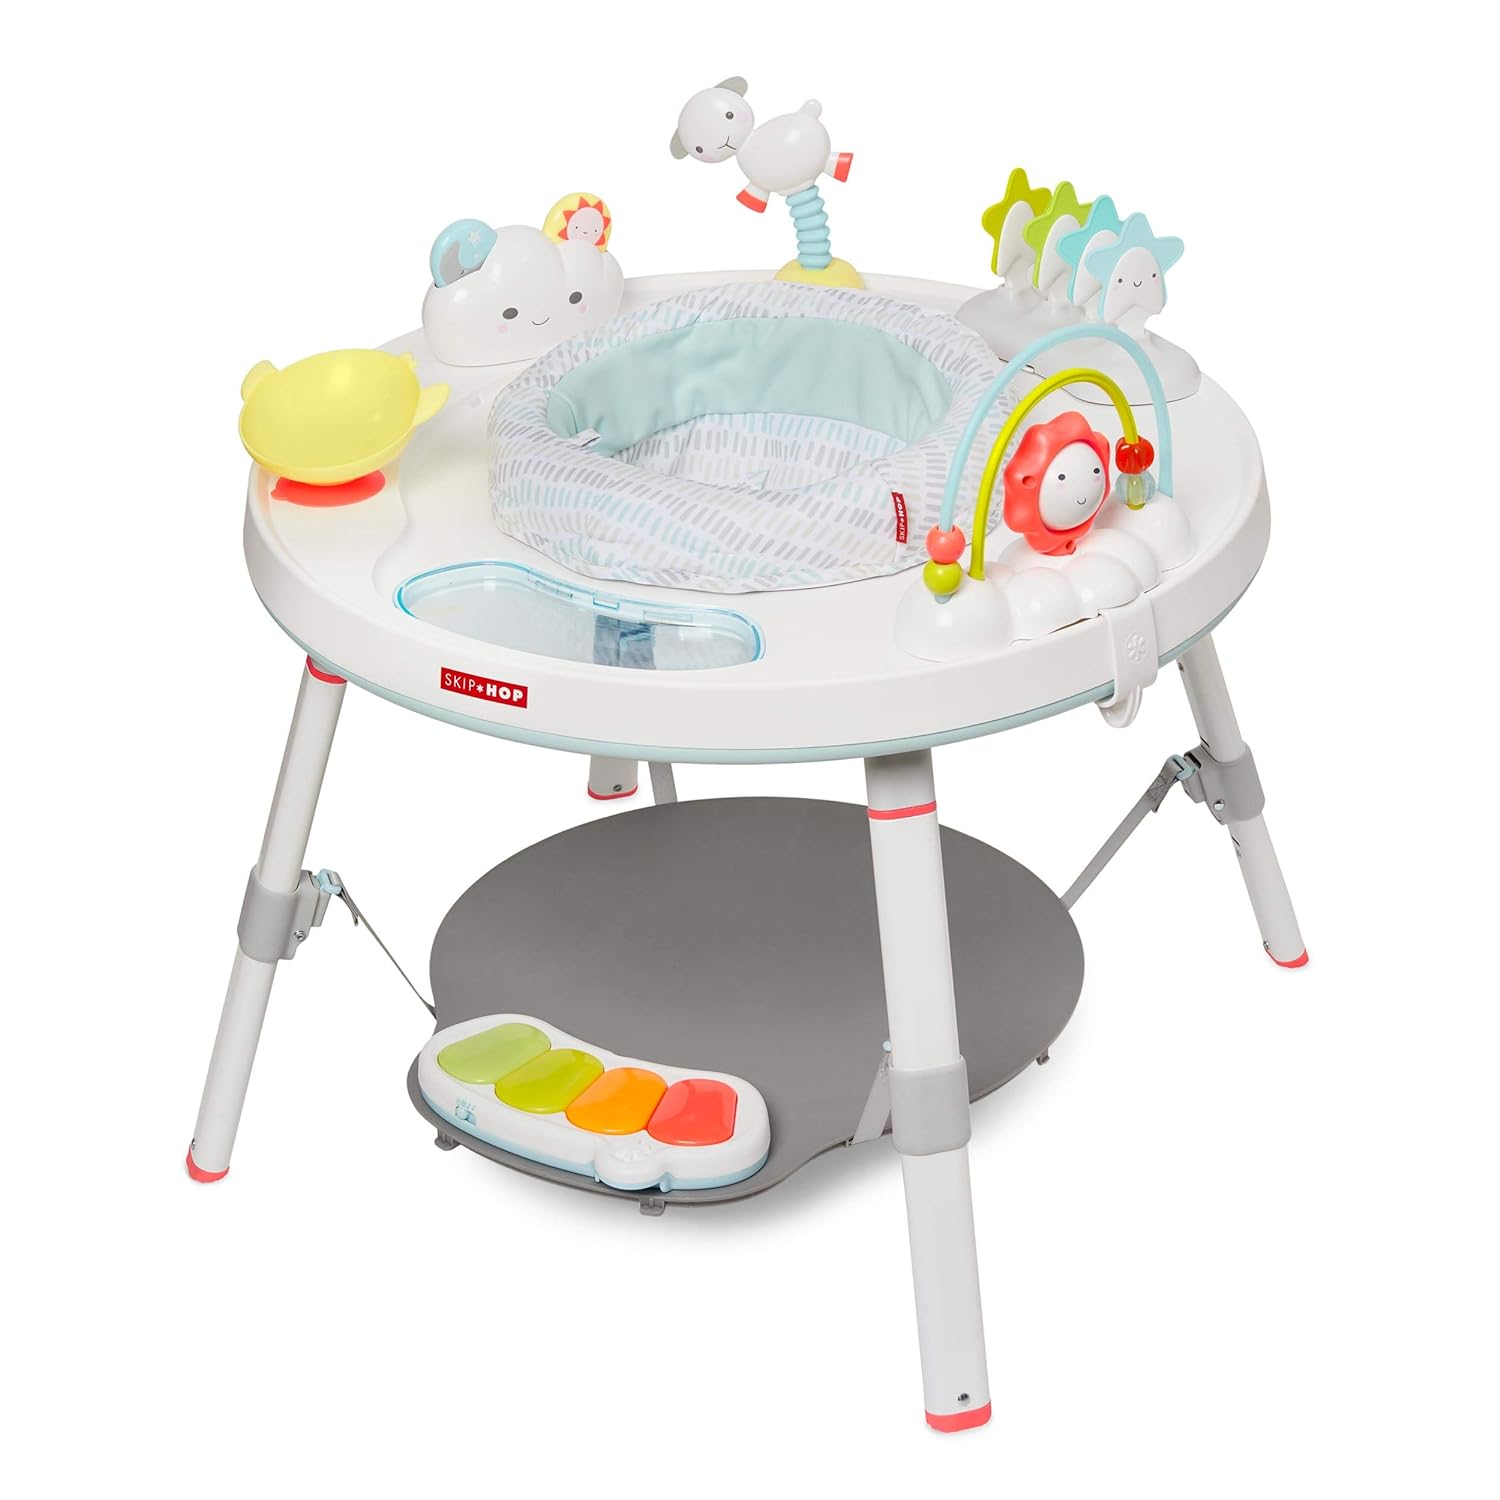 GCP Products Baby Activity Center: Interactive Play Center With 3-Stage Grow-With-Me Functionality, 4Mo+, Silver Lining Cloud